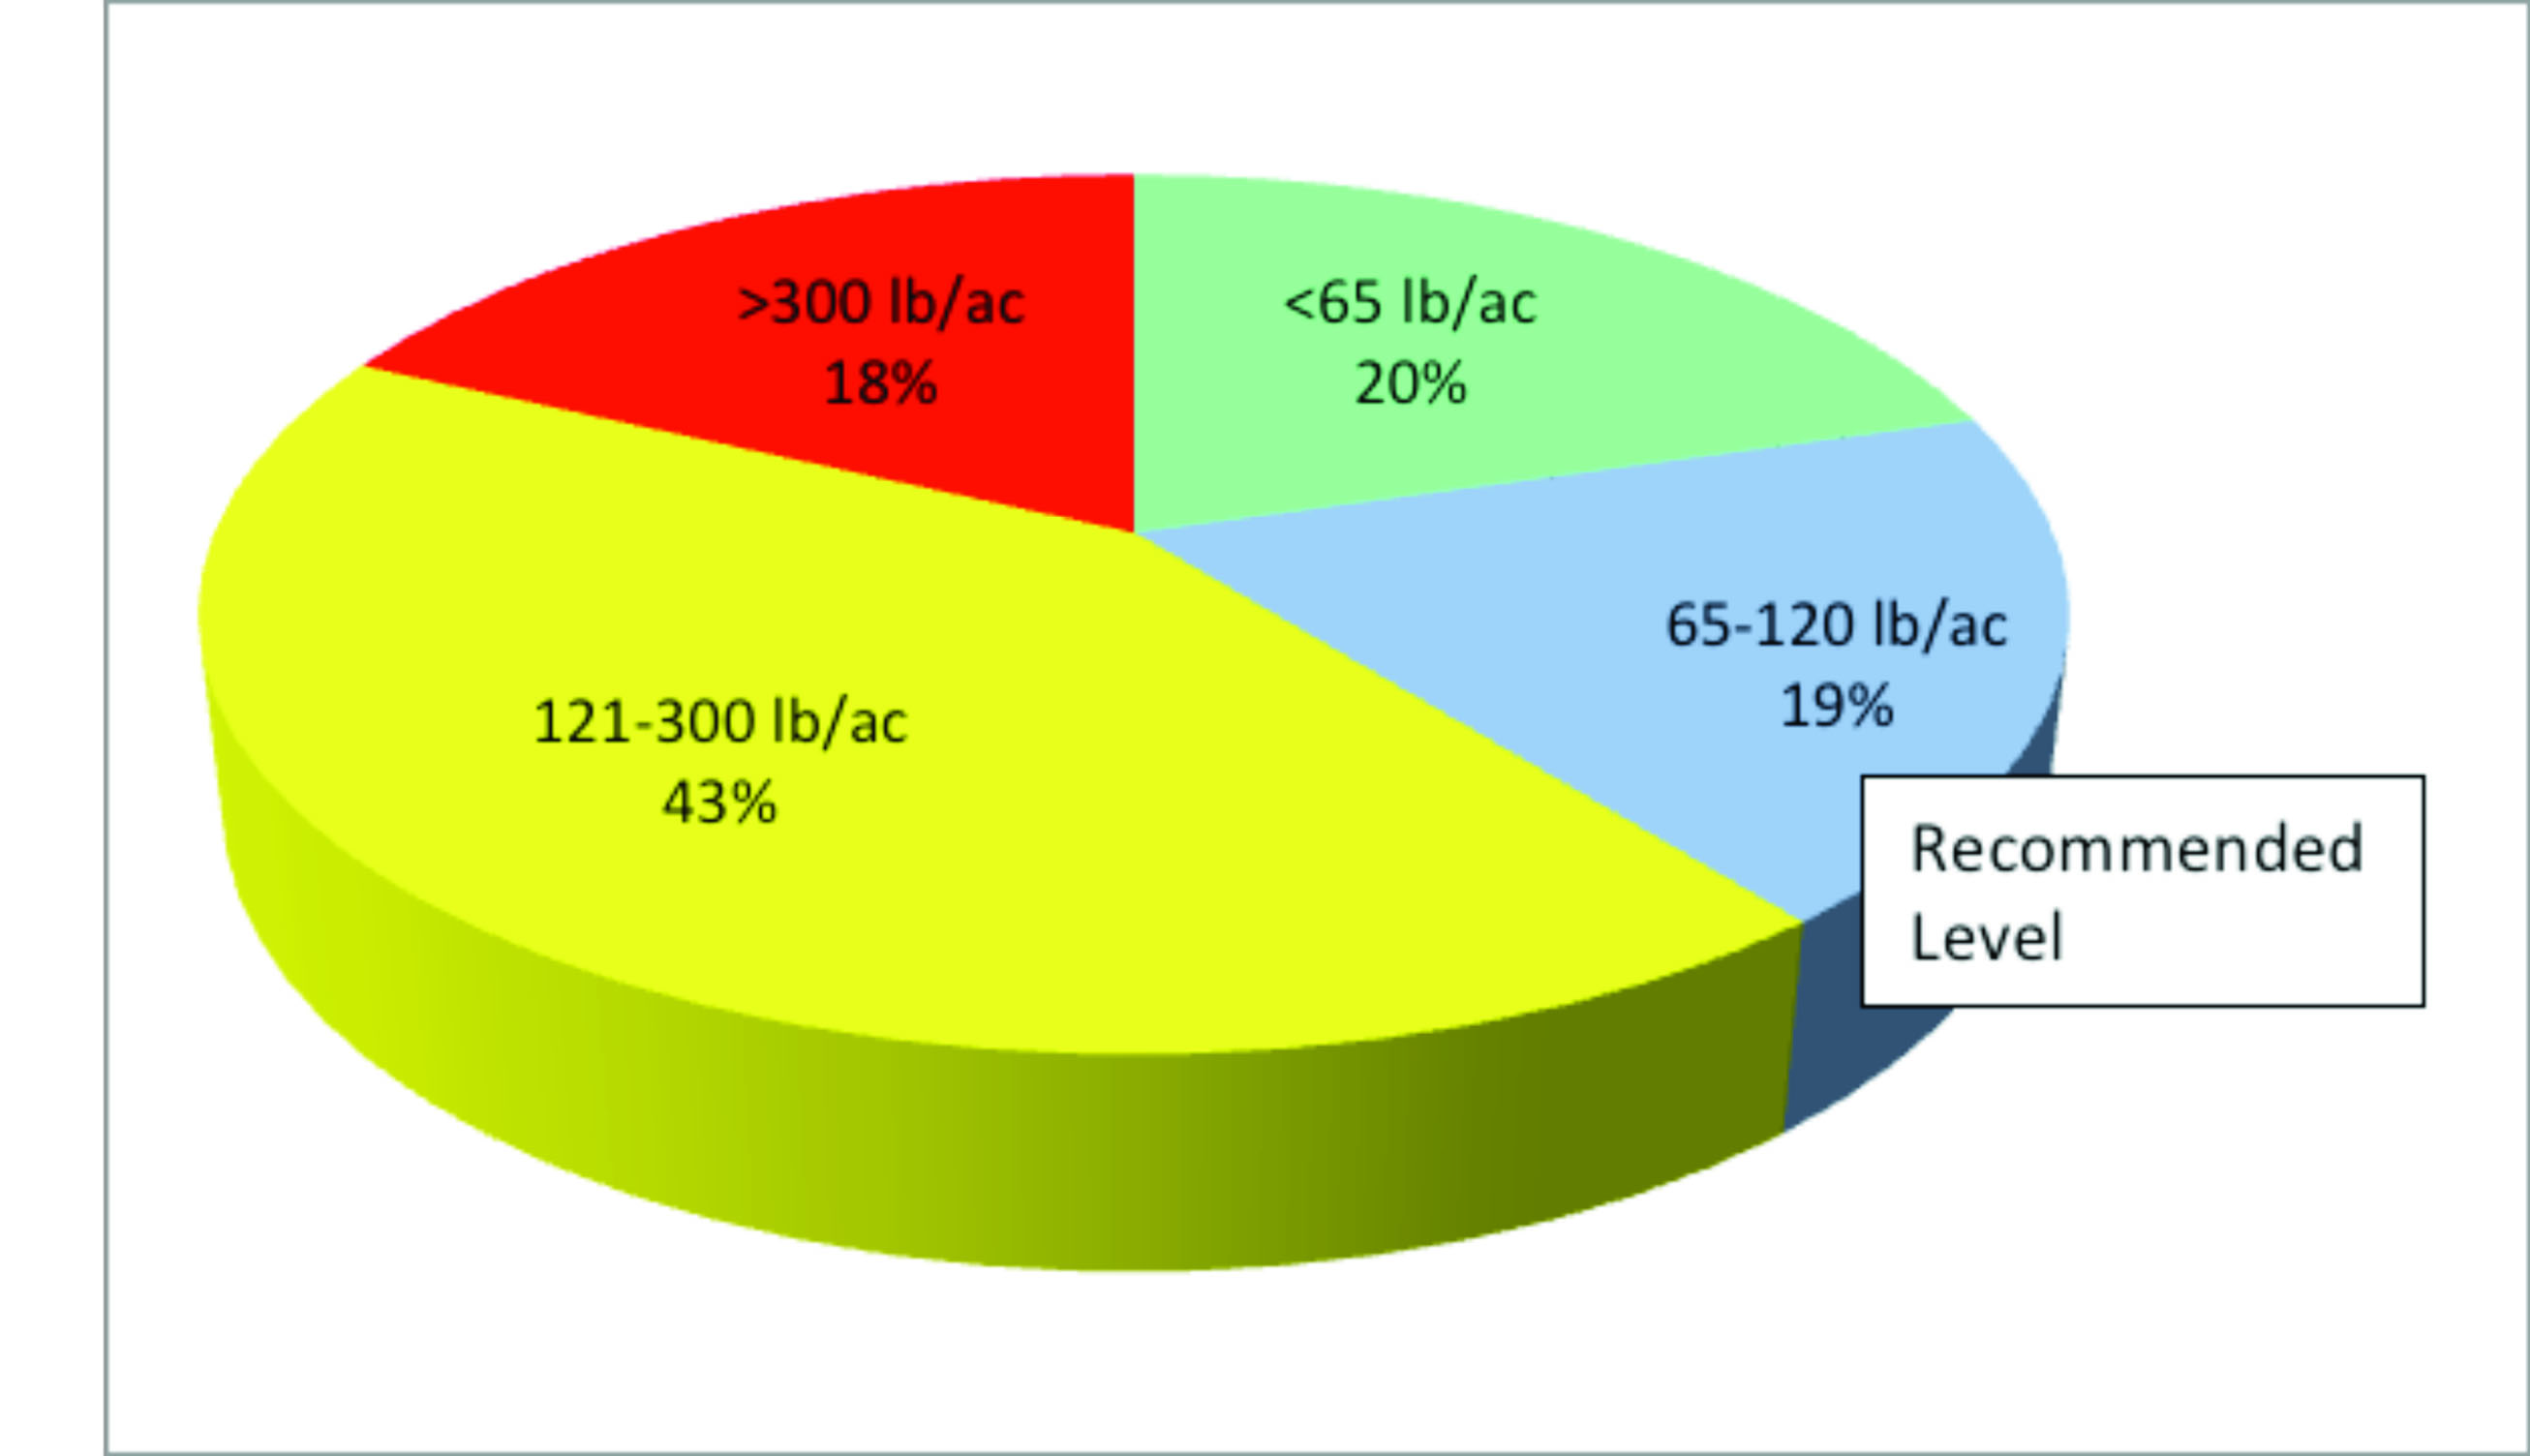 A pie chart showing the soil test P distribution and the recommended level of P being at 65-120 lb/ac.